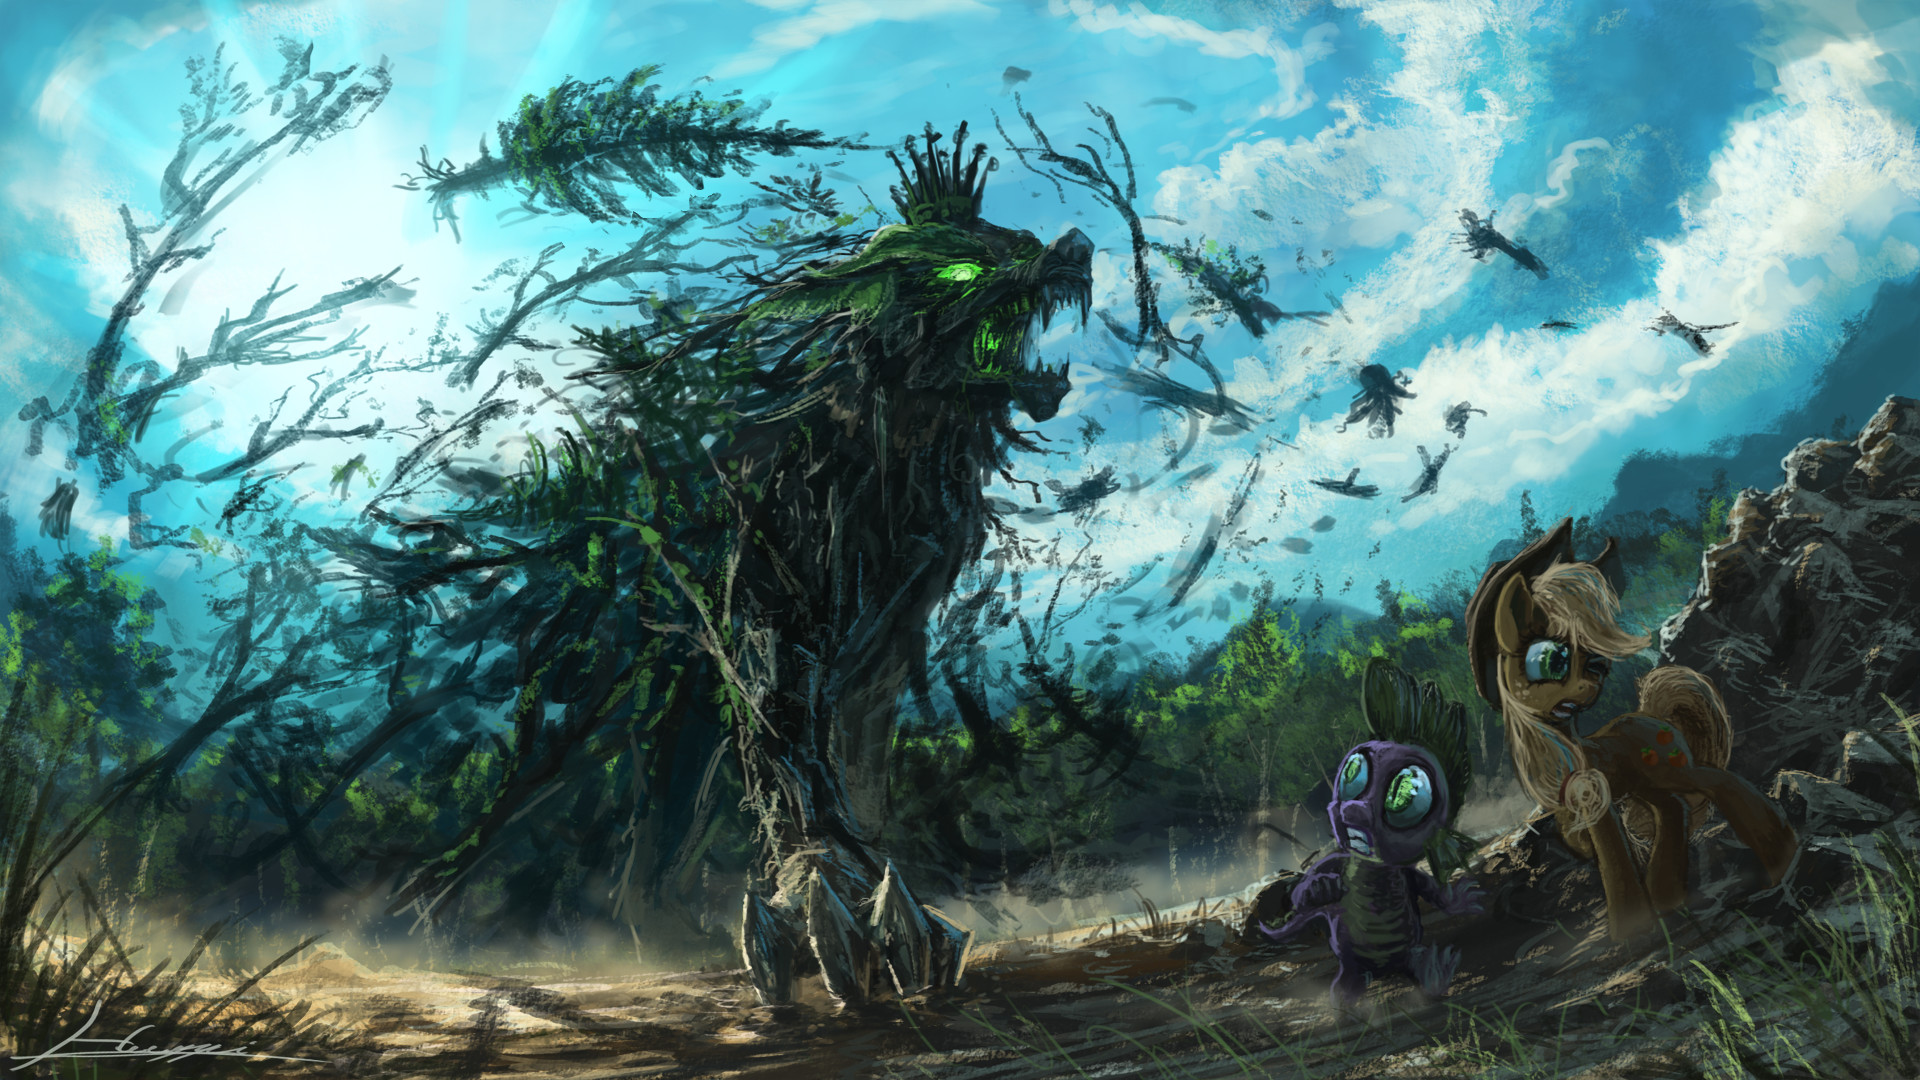 1920x1080 MLP - King of the Forest by Huussii